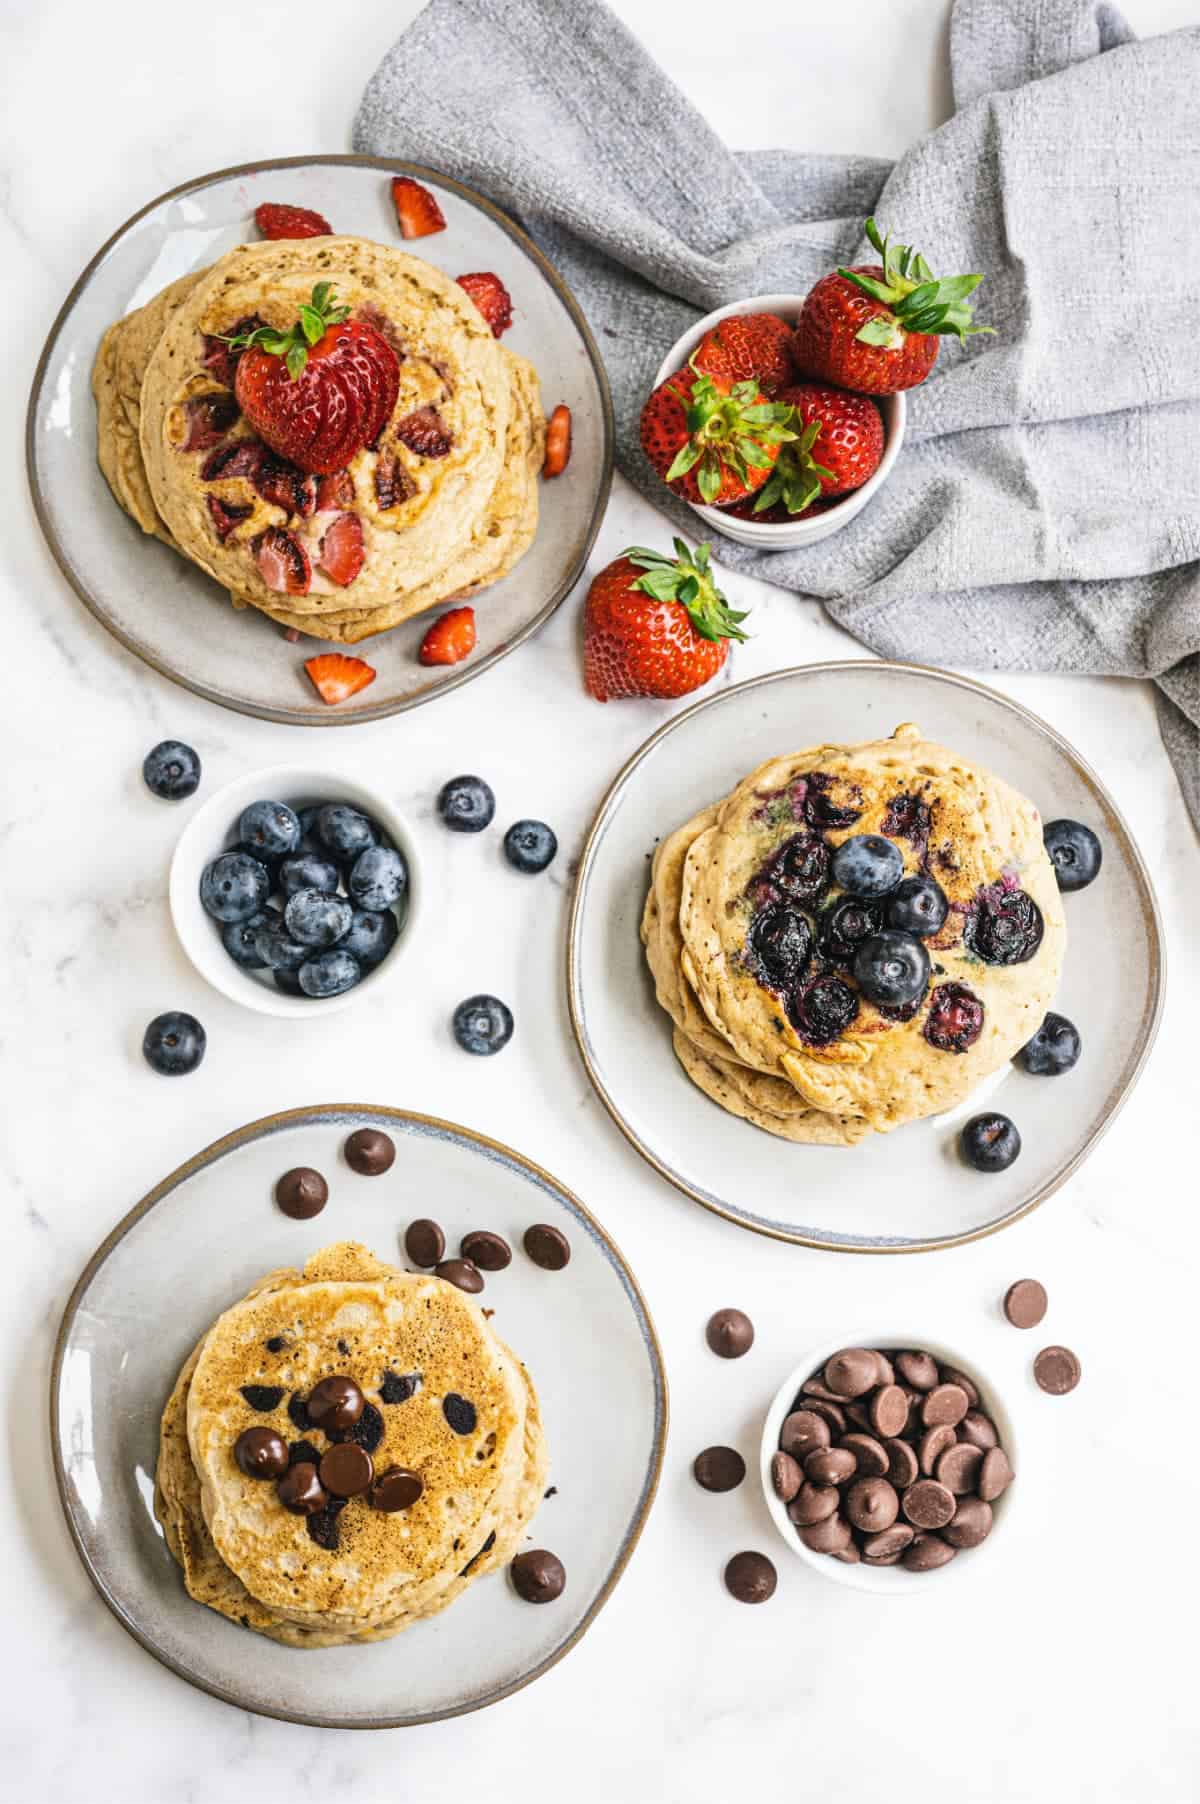 Three plates with short stacks of pancakes, each with a different topping/mix in - Strawberries, blueberries, and chocolate chips.